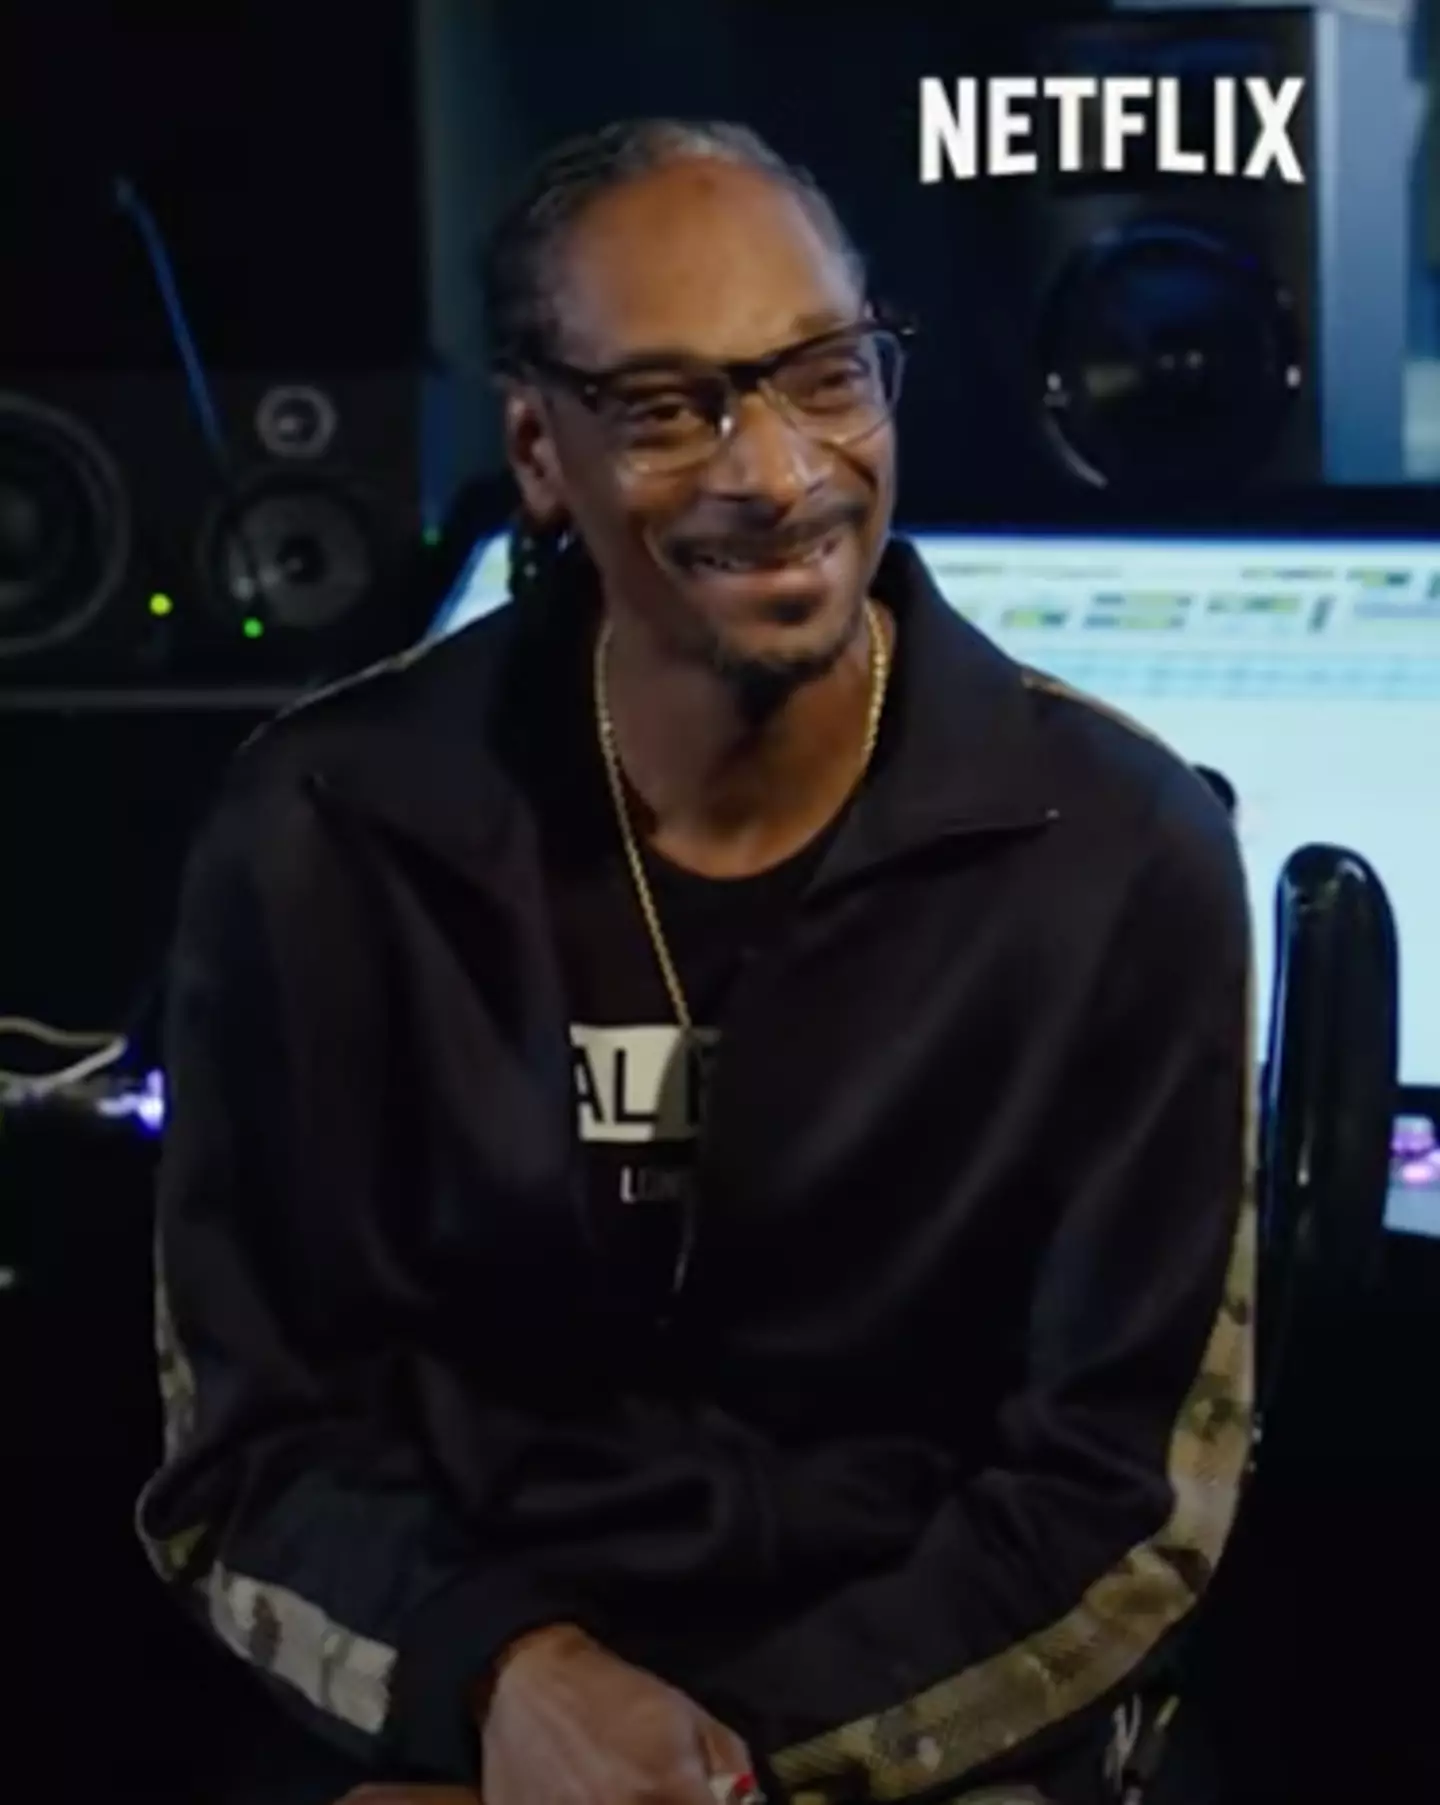 Snoop has explained why he doesn't drink much booze.